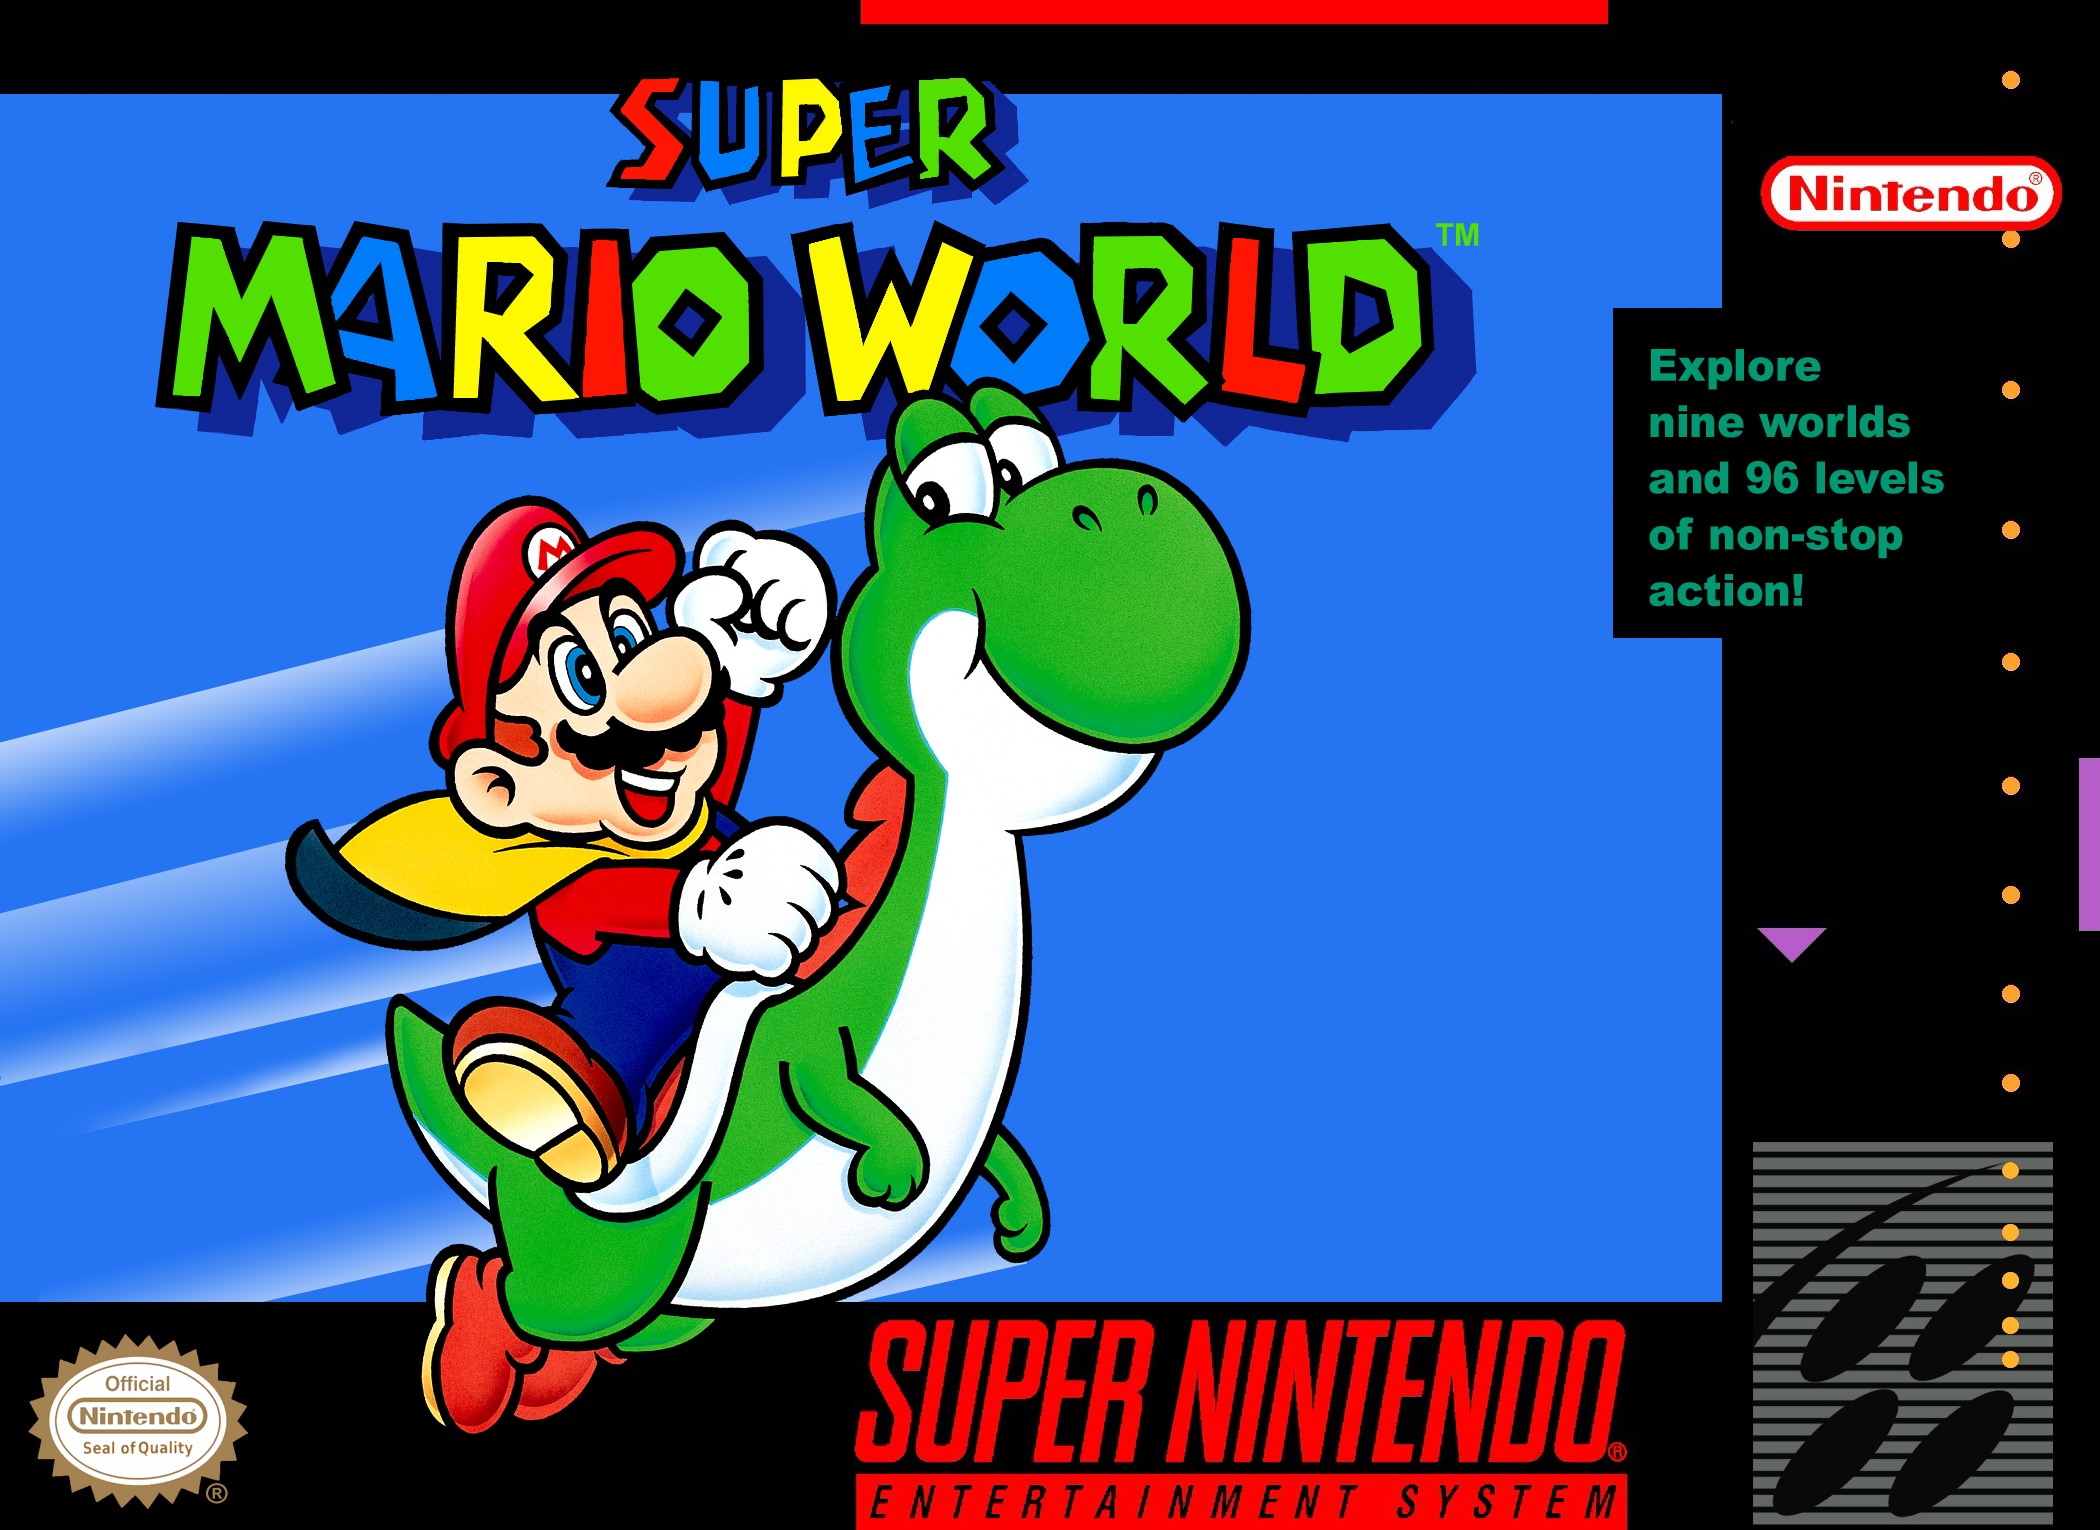 Play your favorite MSX Homebrew titles ONLINE! - Super Mario World